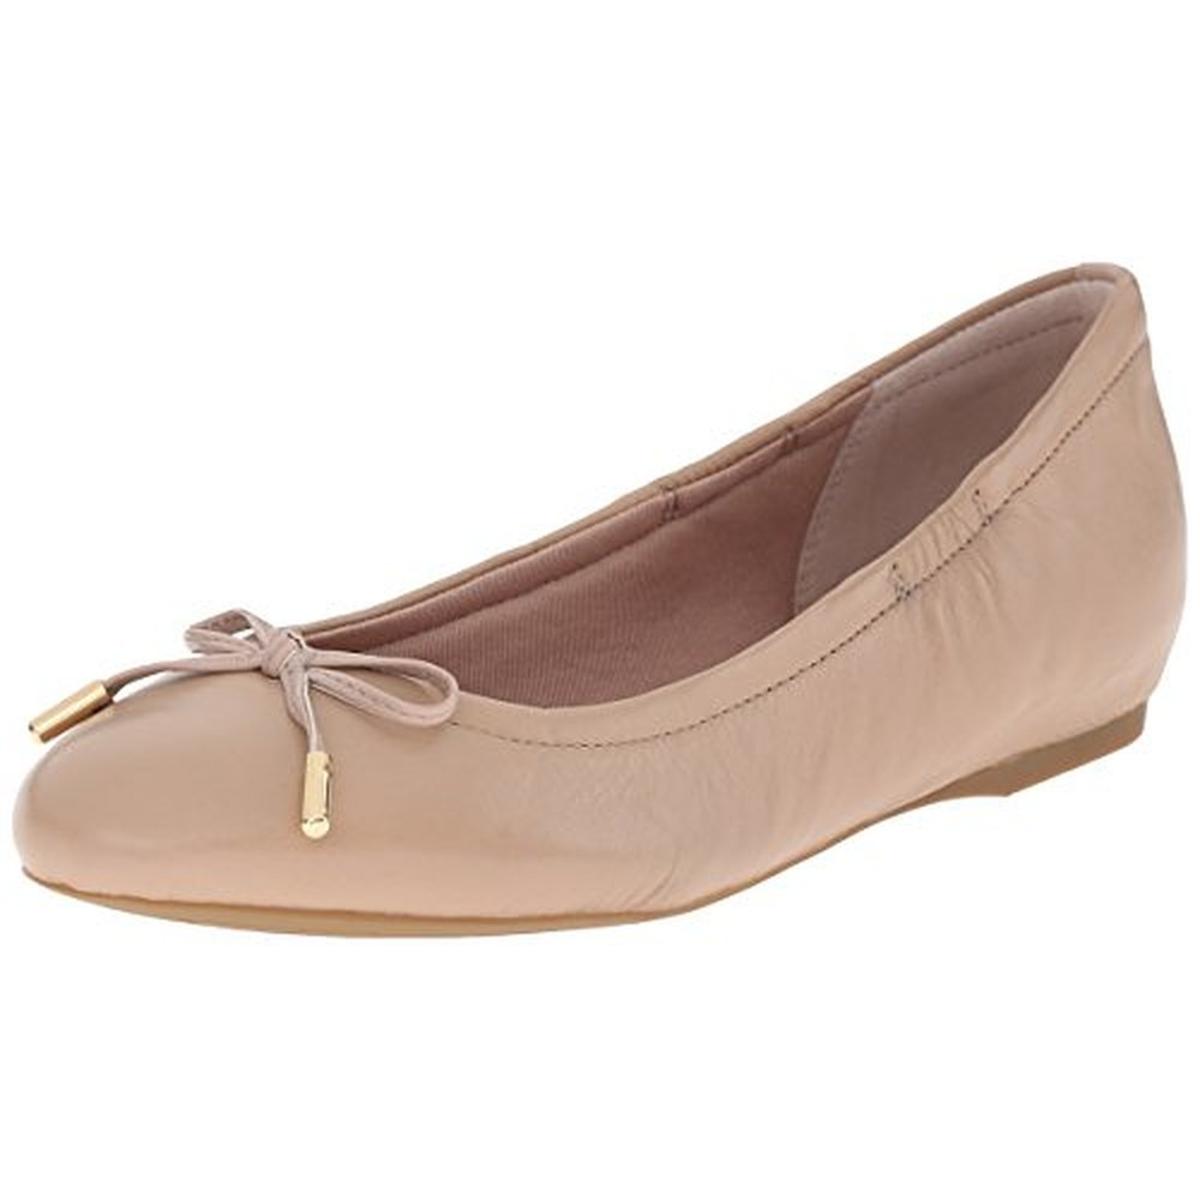 Rockport Womens Taupe Leather Ballet Flats Shoes 6 Medium (B,M) BHFO ...